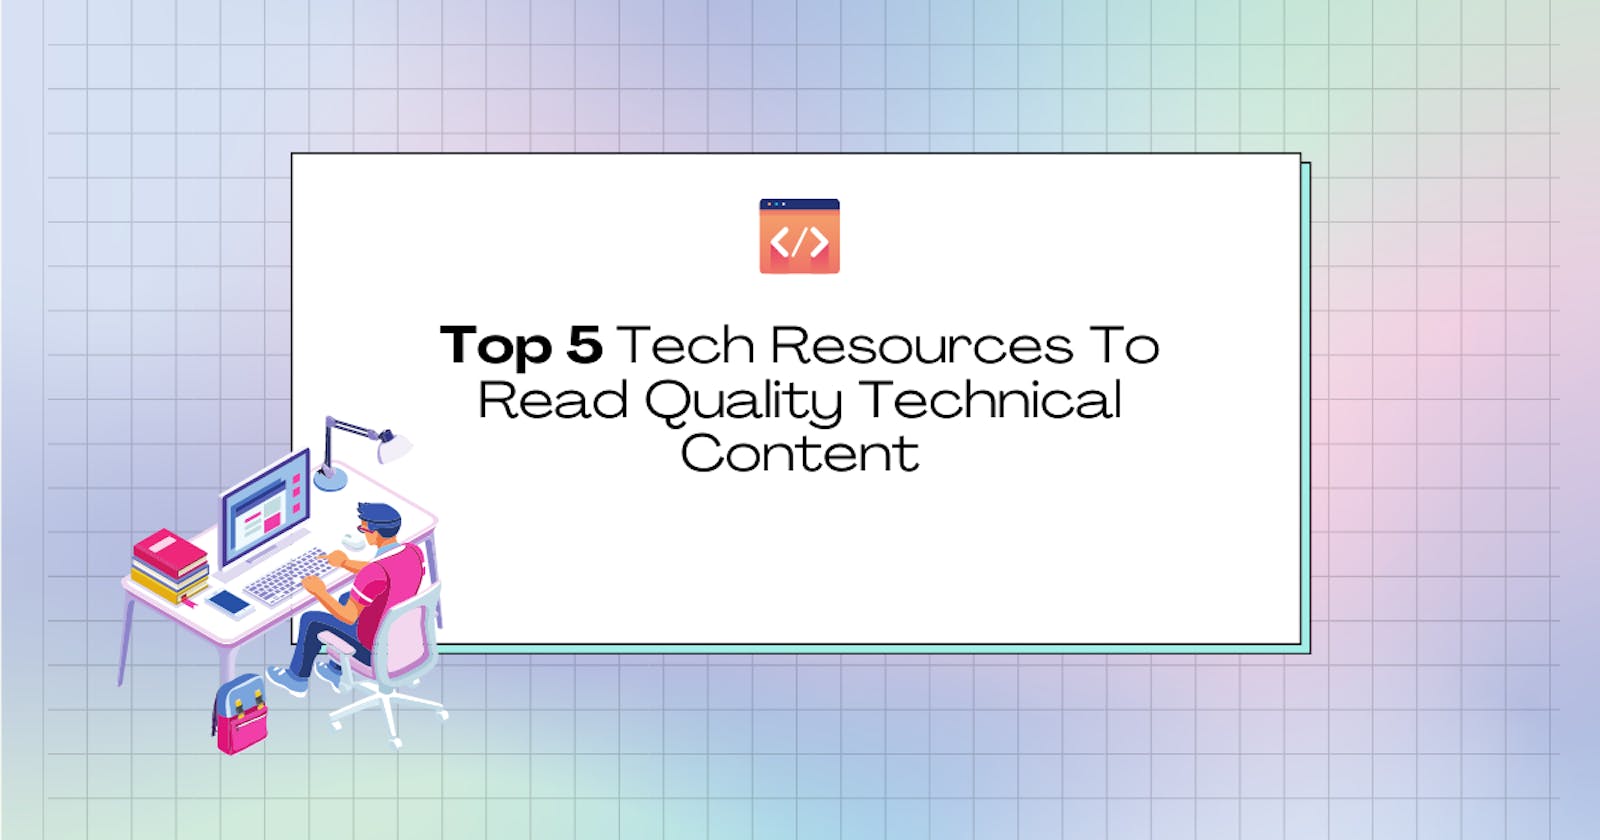 Top 5 Tech Resources To Read Quality Technical Content